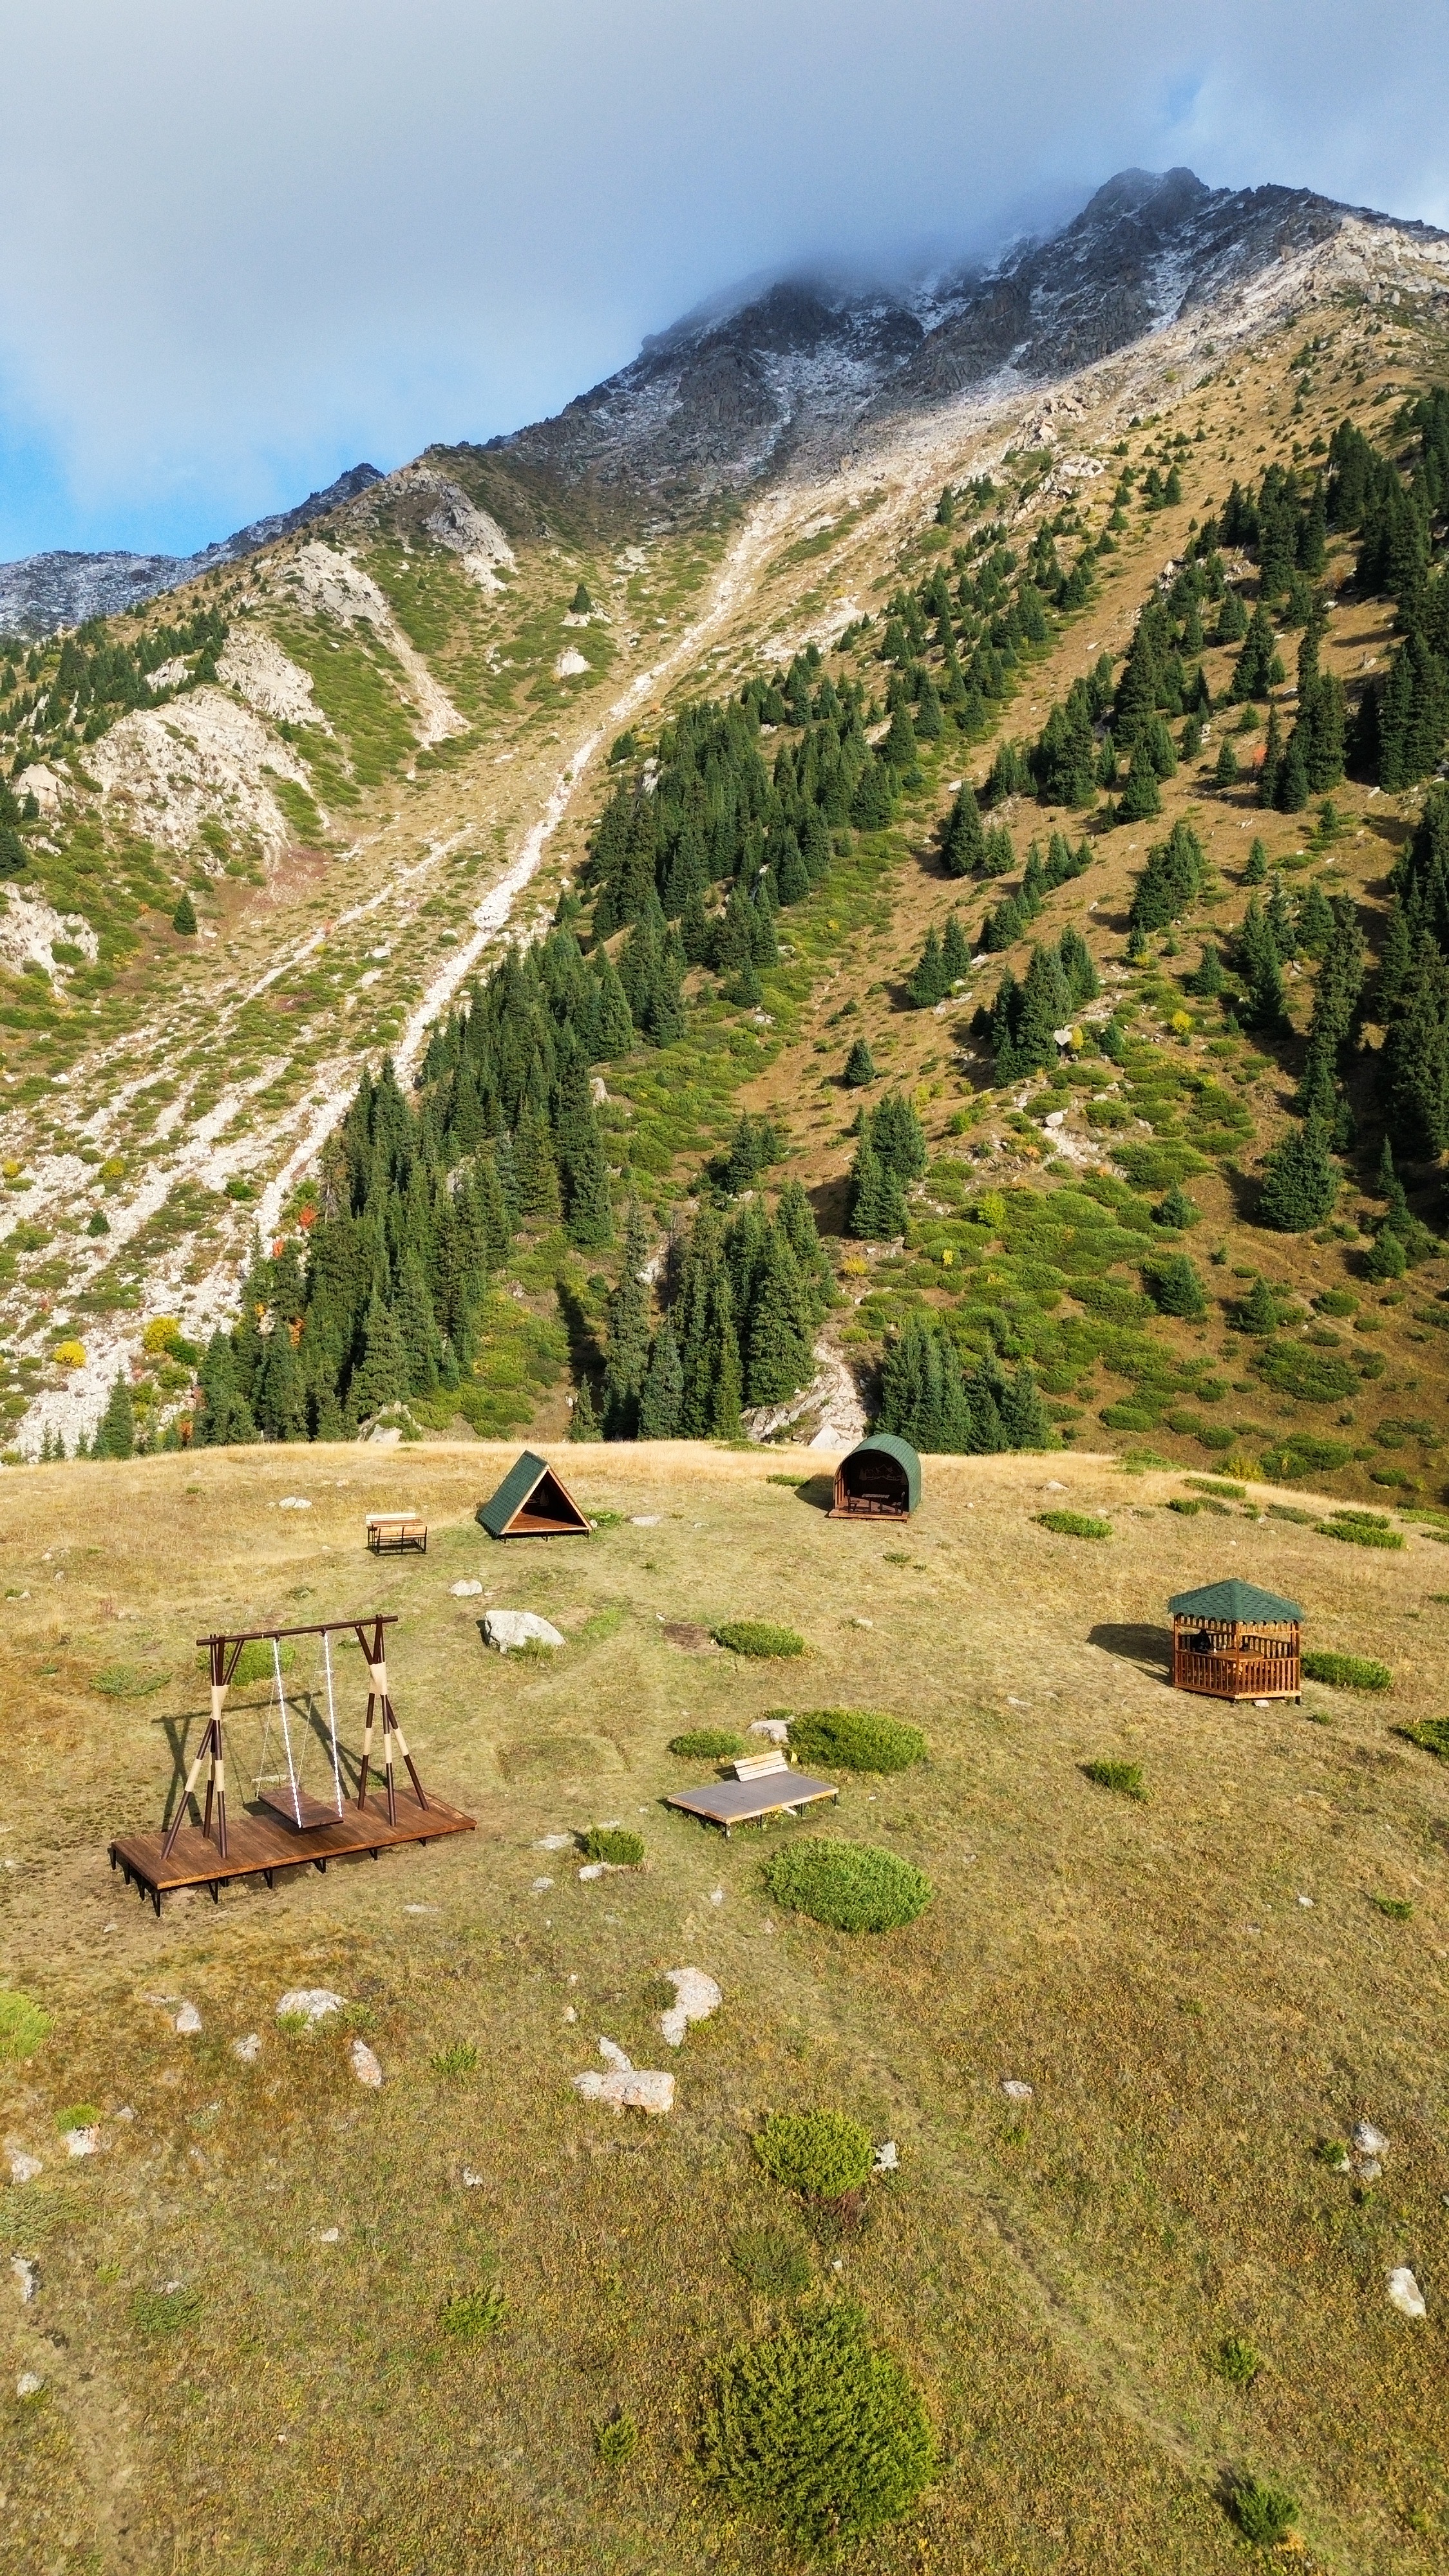 A new camping zone has been opened in Almaty